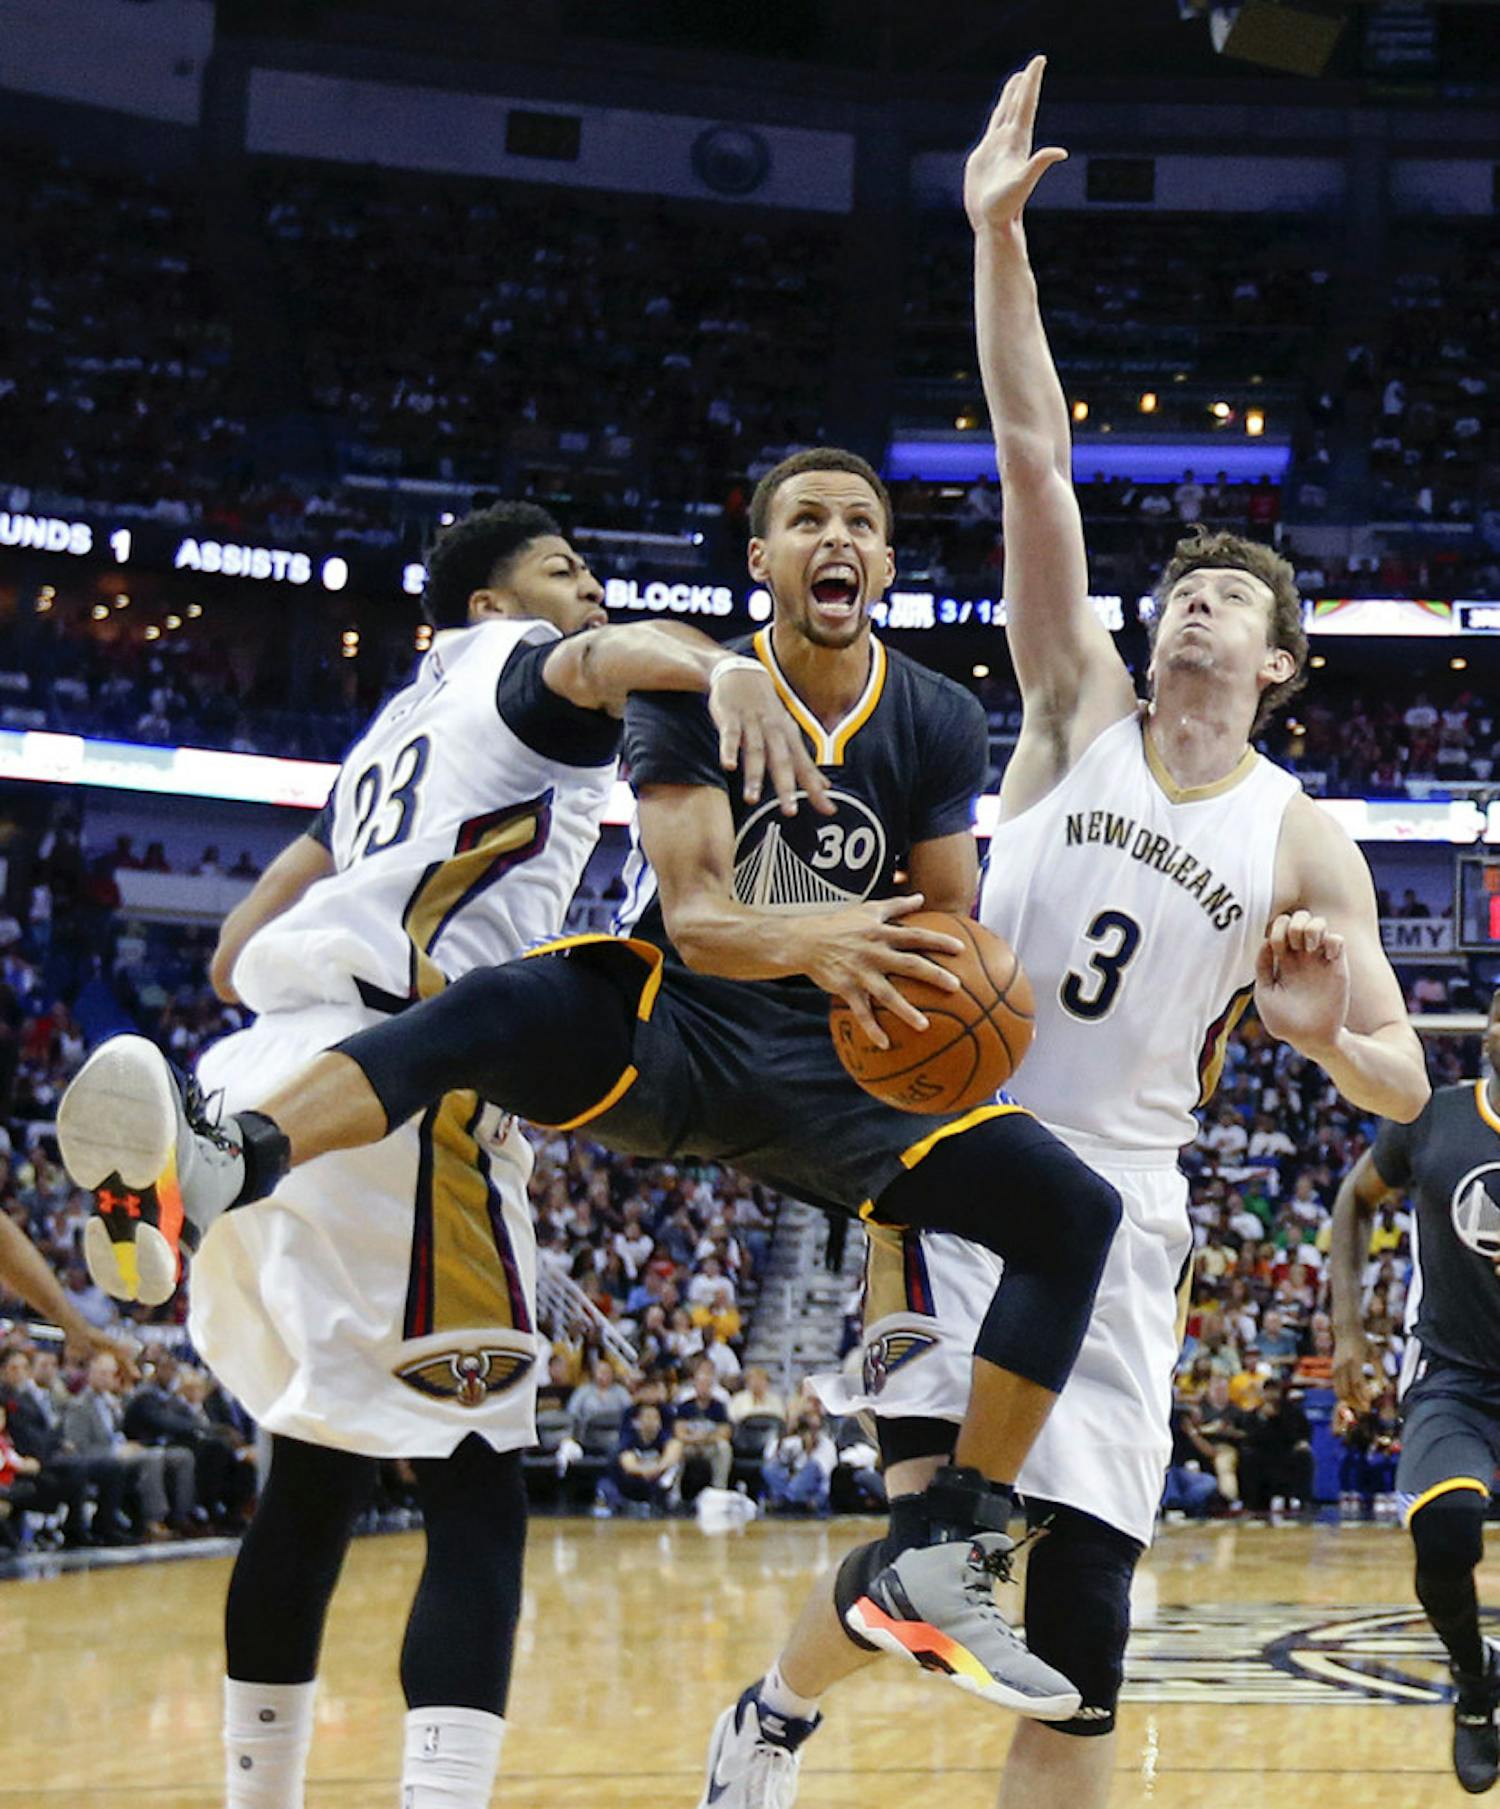 Golden State Warriors guard Stephen Curry (30) drives to the basket between New Orleans Pelicans forward Anthony Davis (23) and center Omer Asik (3) in the second half of an NBA basketball game in New Orleans, Saturday, Oct. 31, 2015. The Warriors won 134-120.